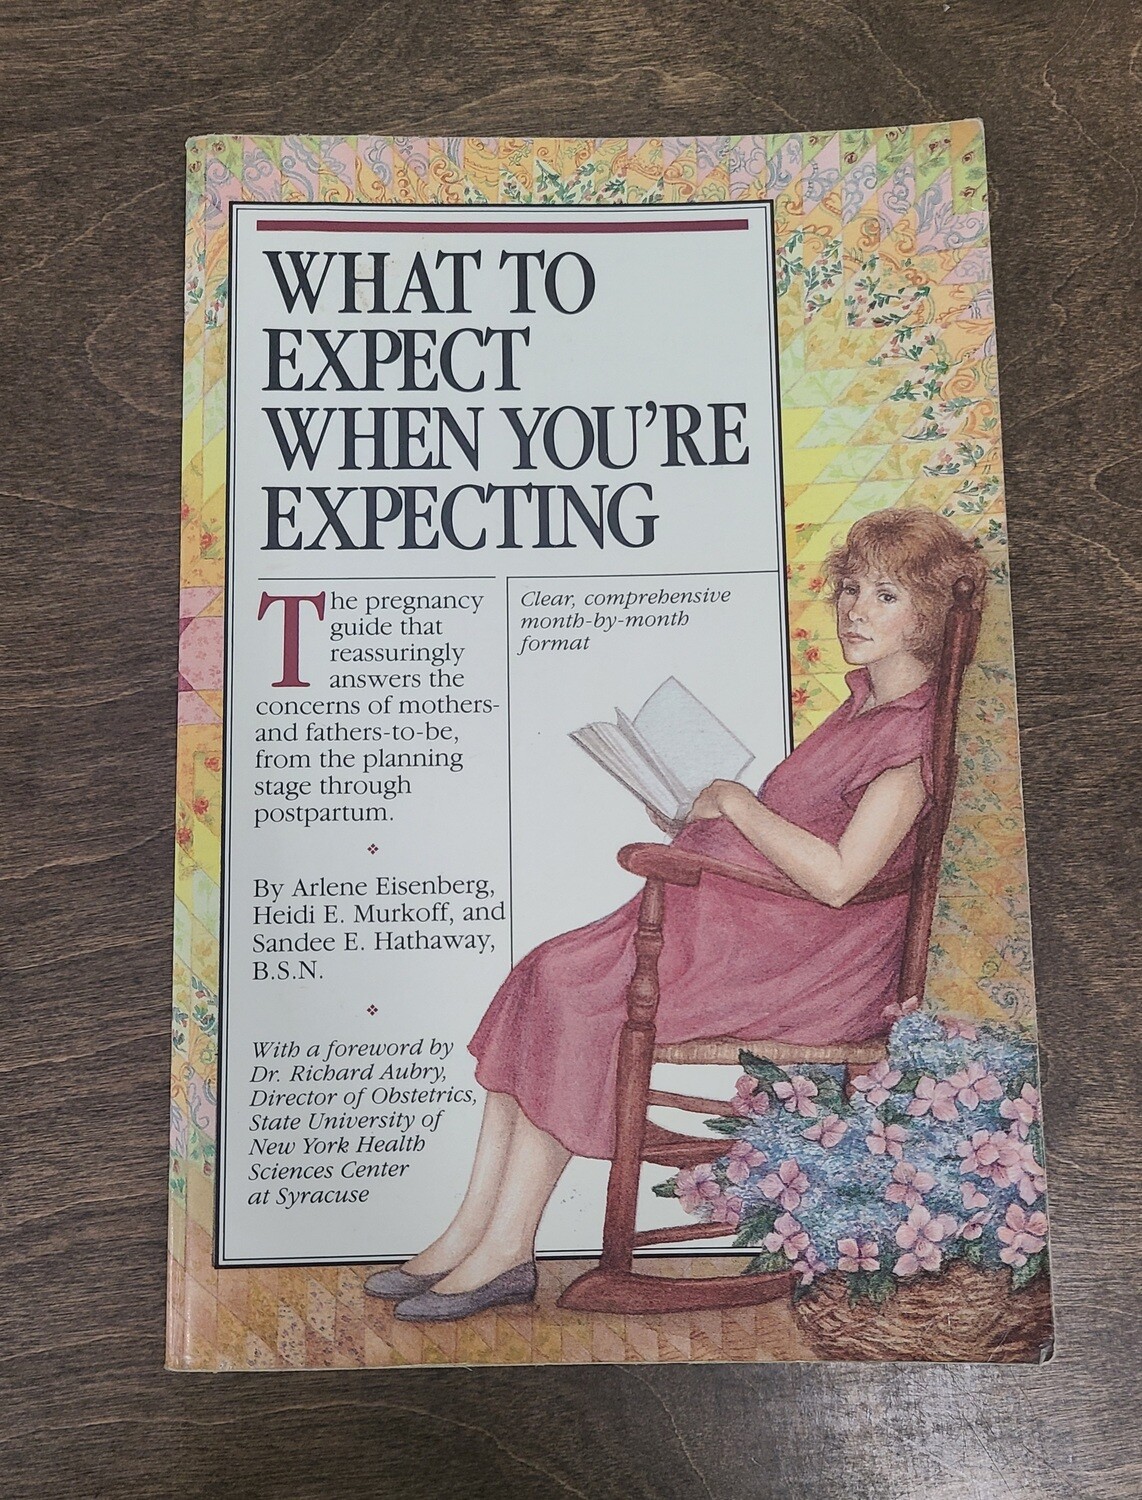 What to Expect When You're Expecting by Arlene Eisenberg, Heidi E. Murkoff, and Sandee E. Hathaway